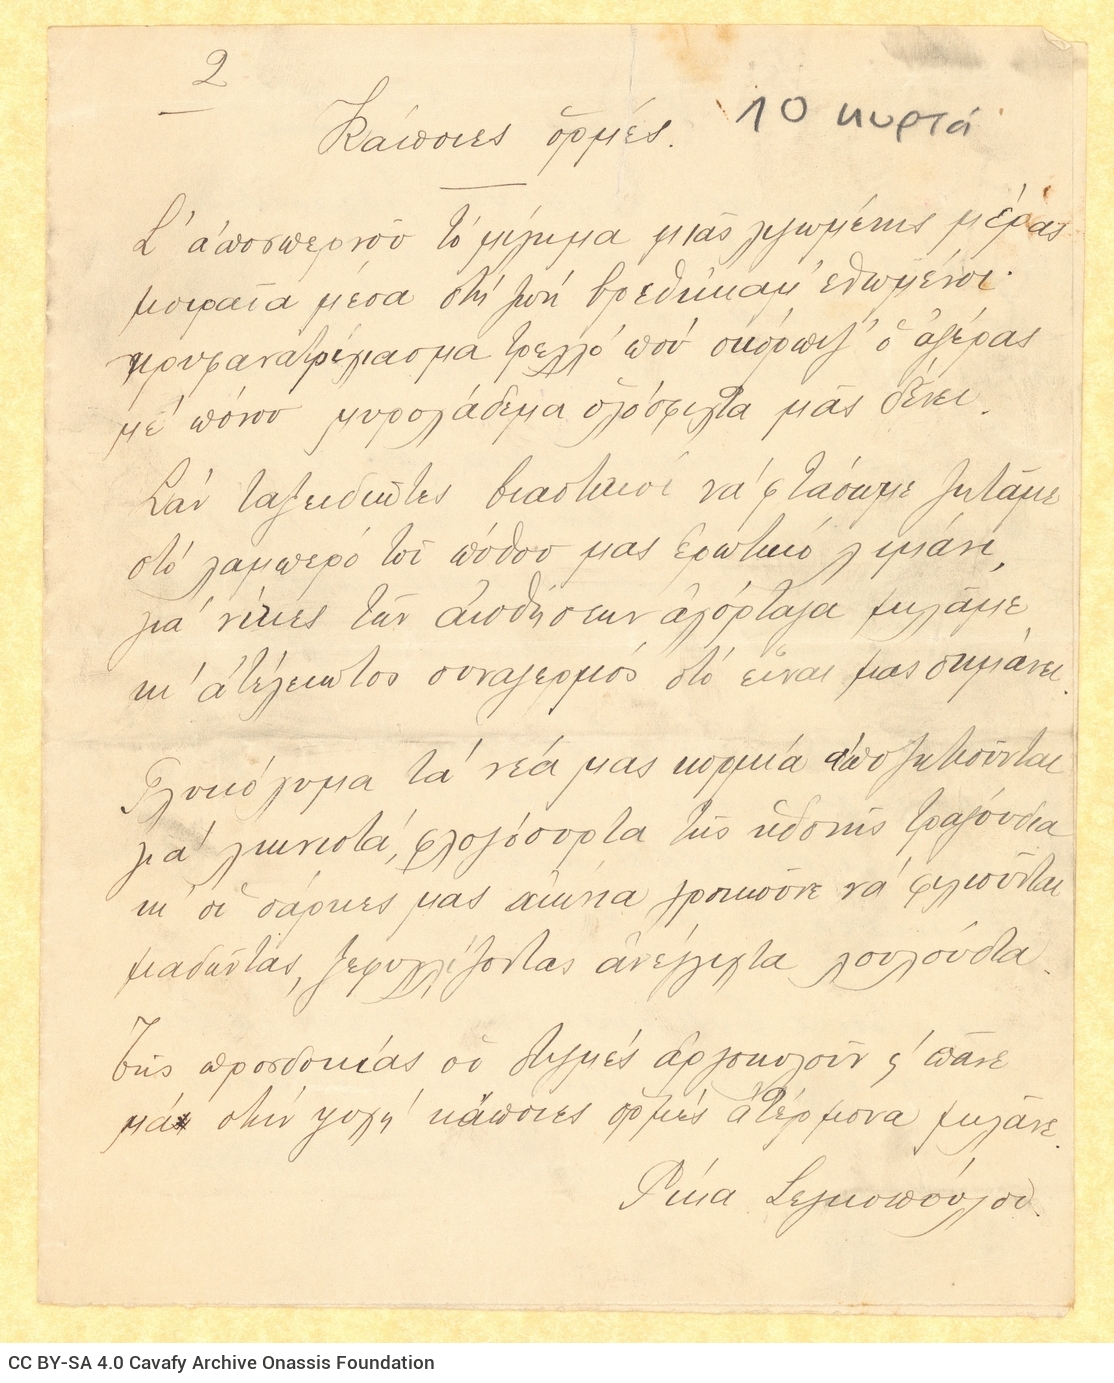 Two handwritten poems by Rica Singopoulo ("Optasia", "Kapoies ormes") on one side of a sheet folded in a bifolio. Numbers "1"